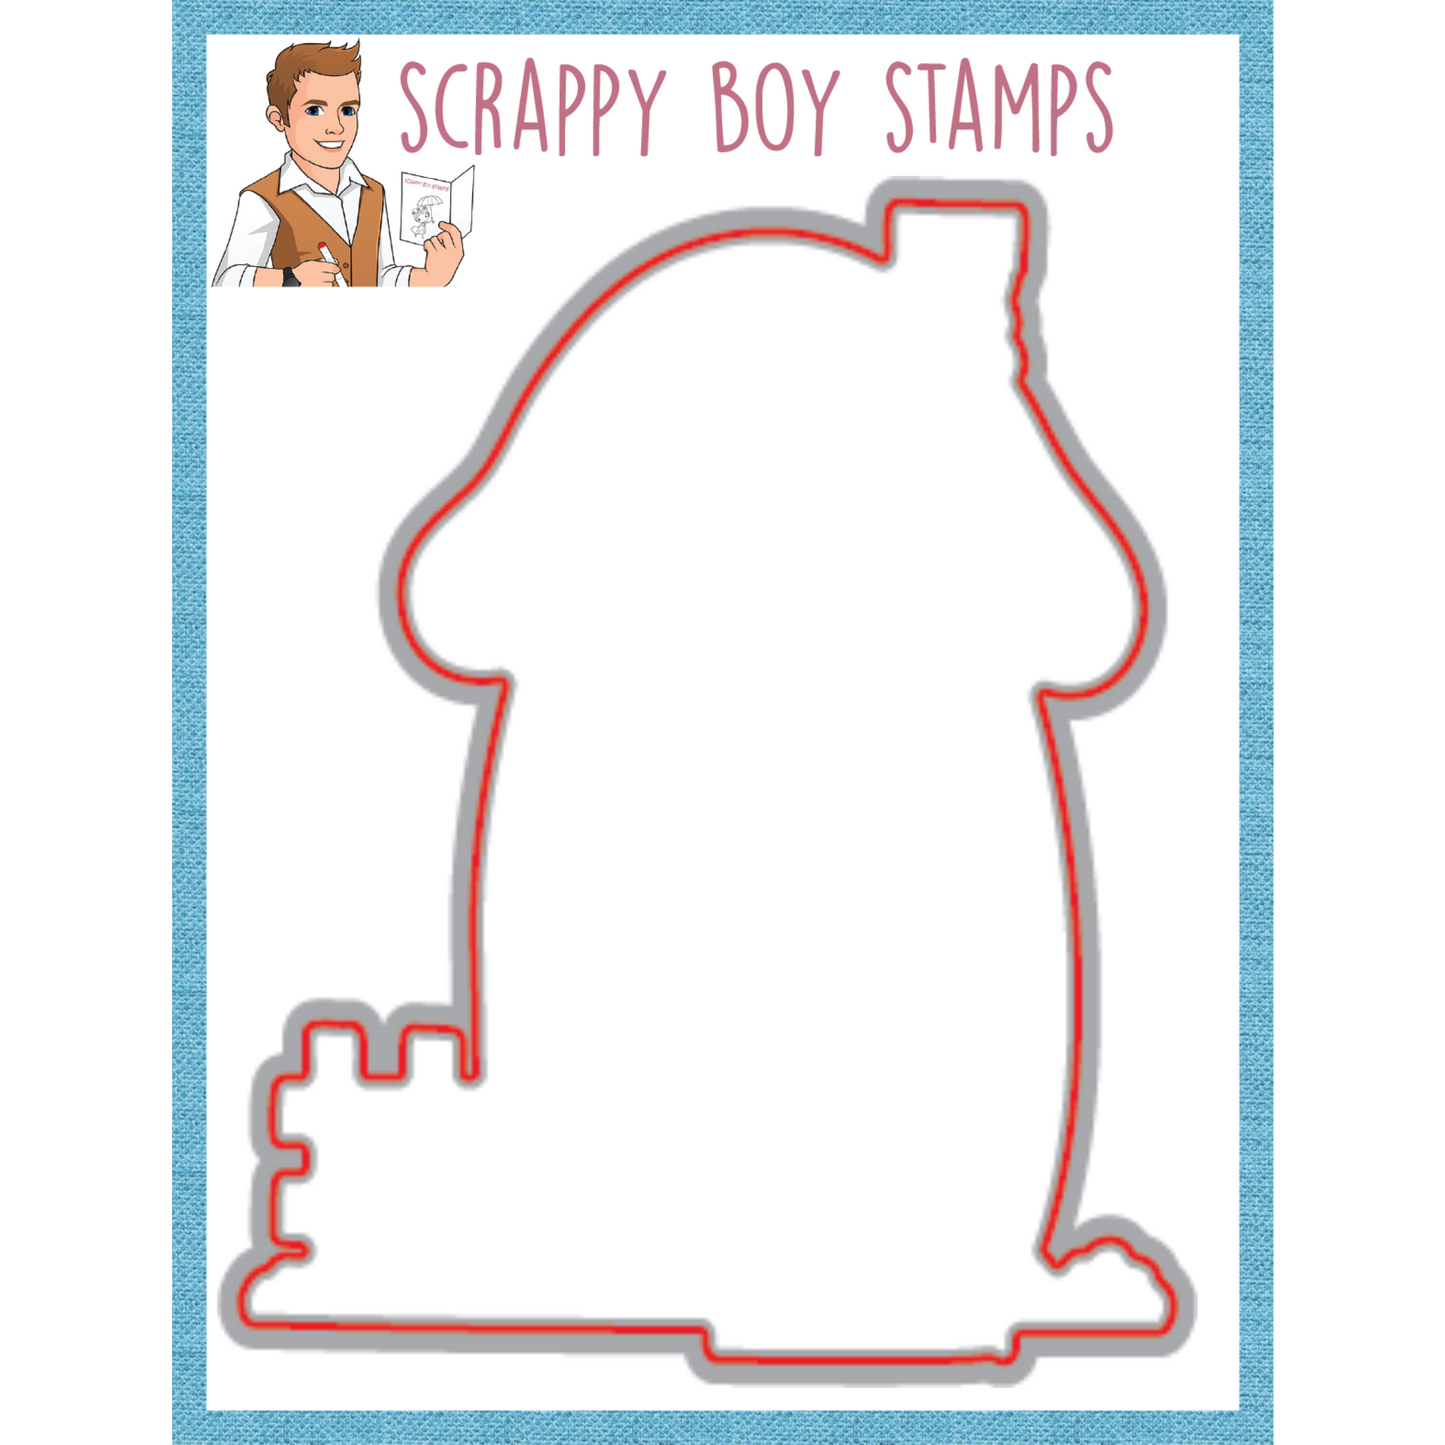 
                  
                    I Want It All Bundle - Christmas Build A Gnome Home Release Scrappy Boy Stamps
                  
                